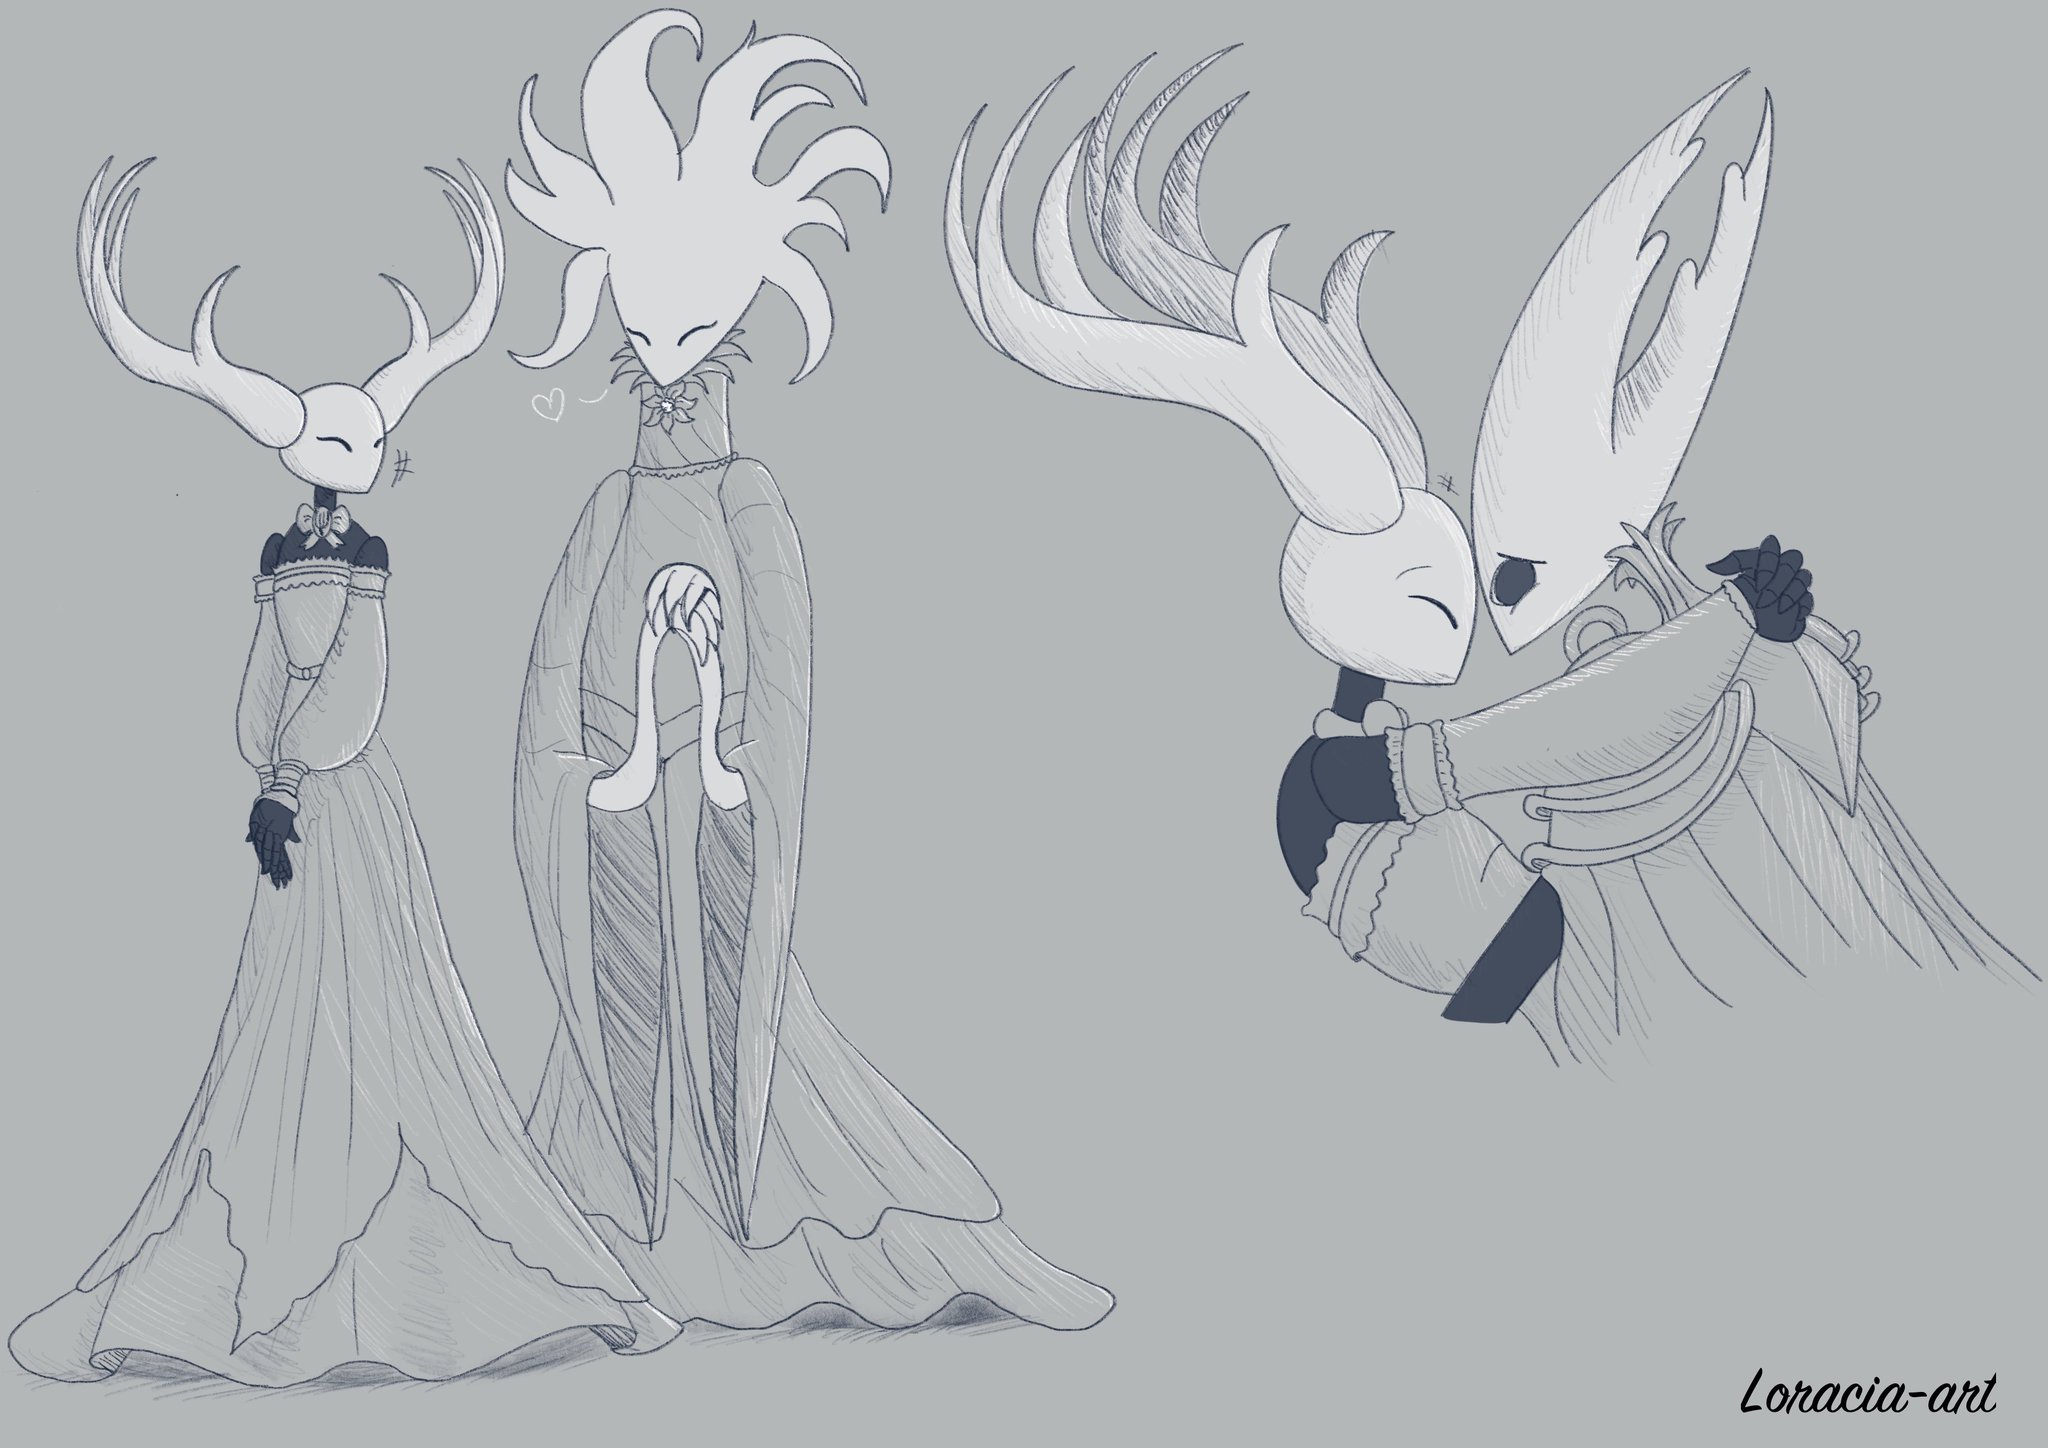 “Some doodle of my ocs of Hollow knight : Dyani and Swann
#hollowkn...